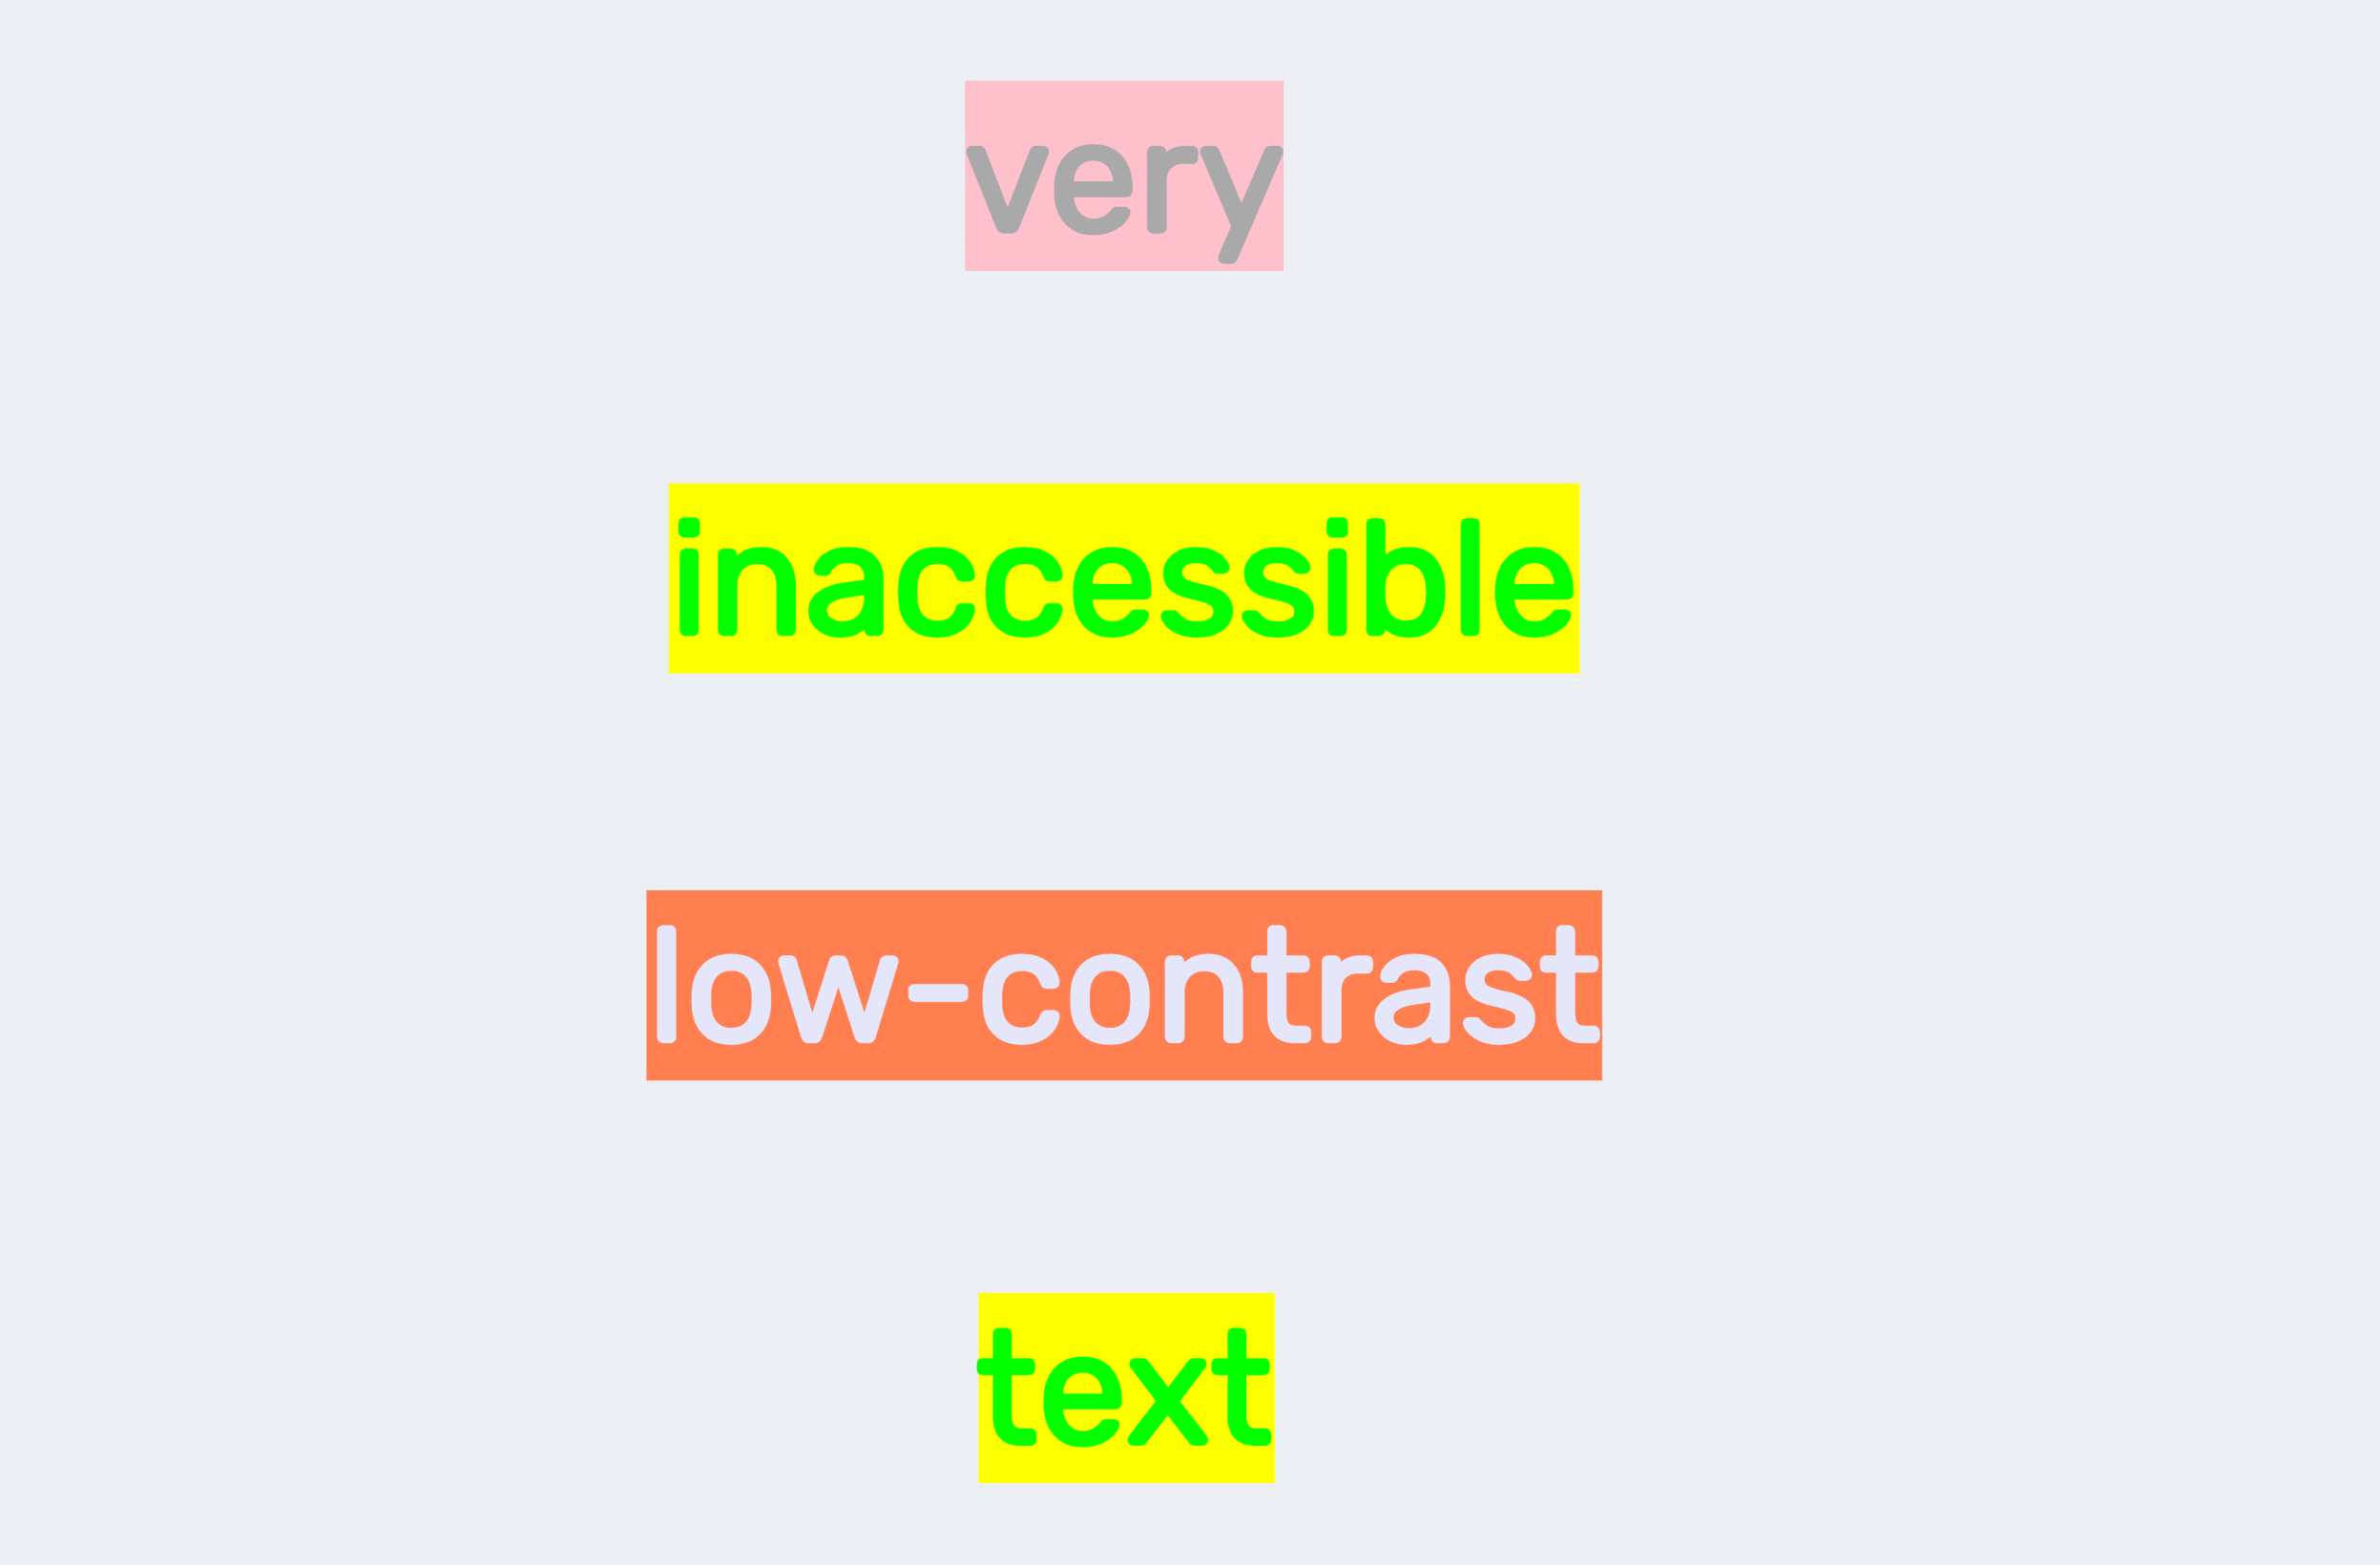 Low-contrast texts